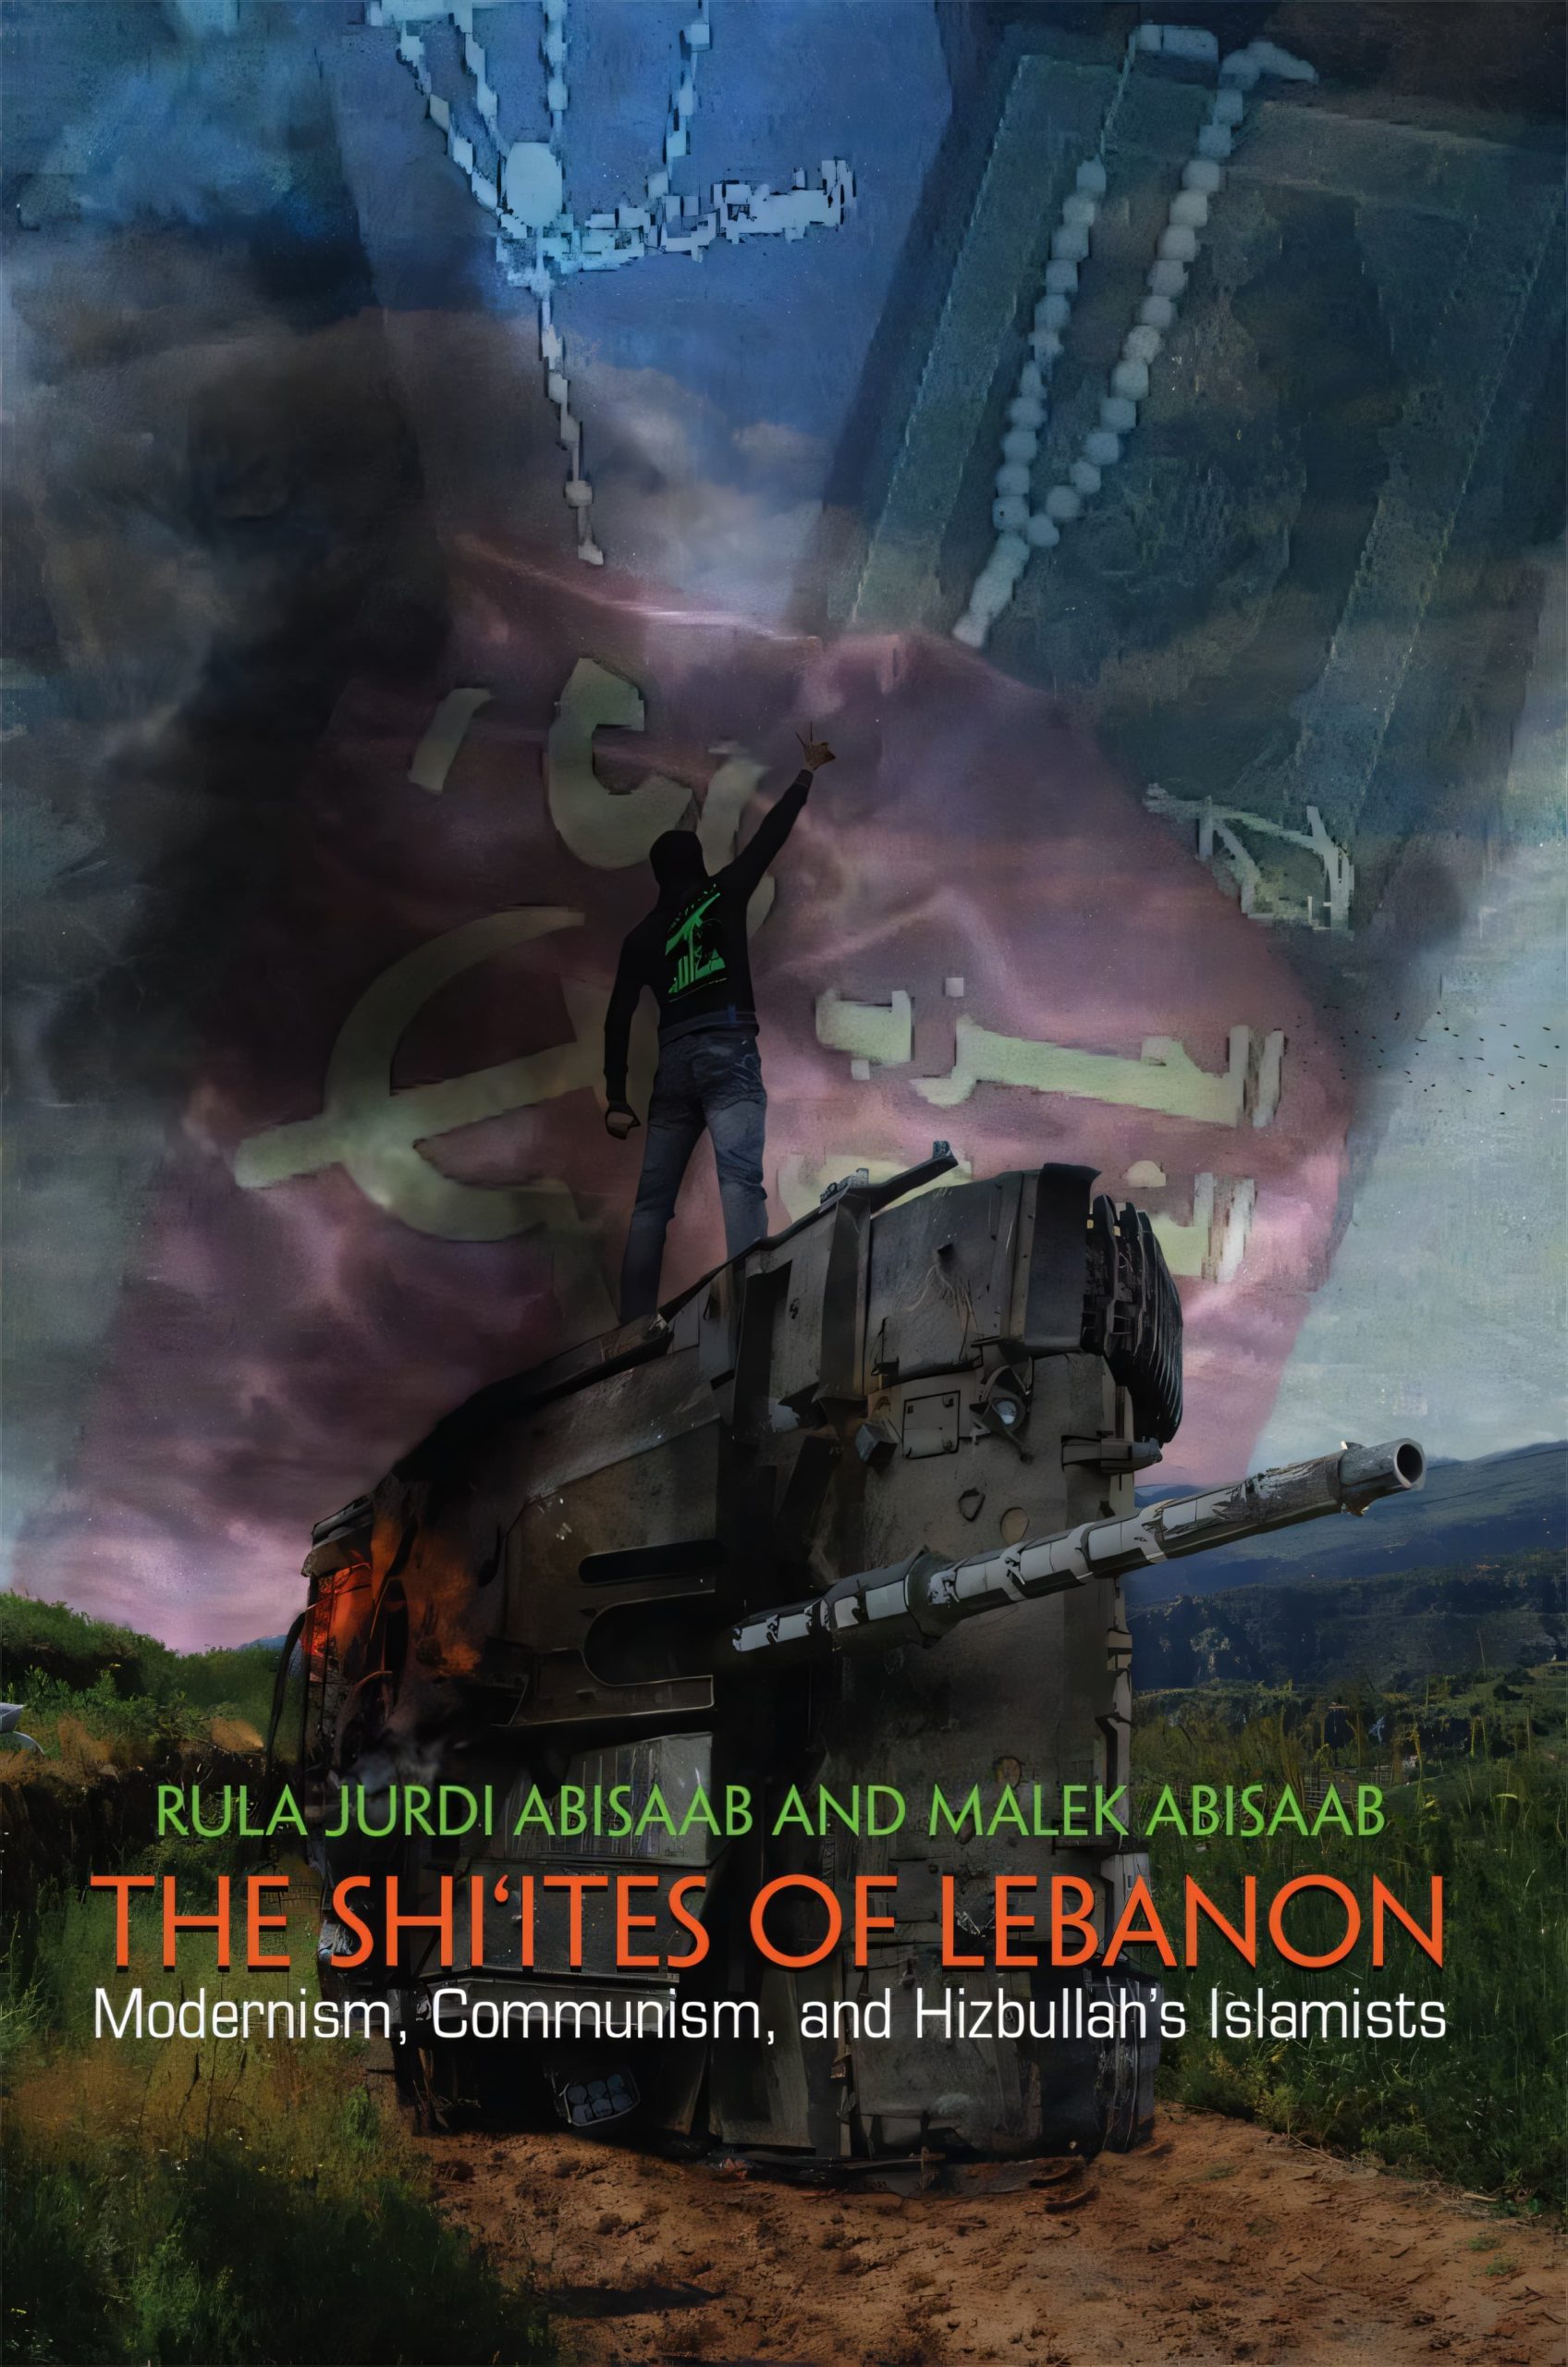 The Shi‘ites of Lebanon. Modernism, Communism, and Hizbullah’s Islamists.